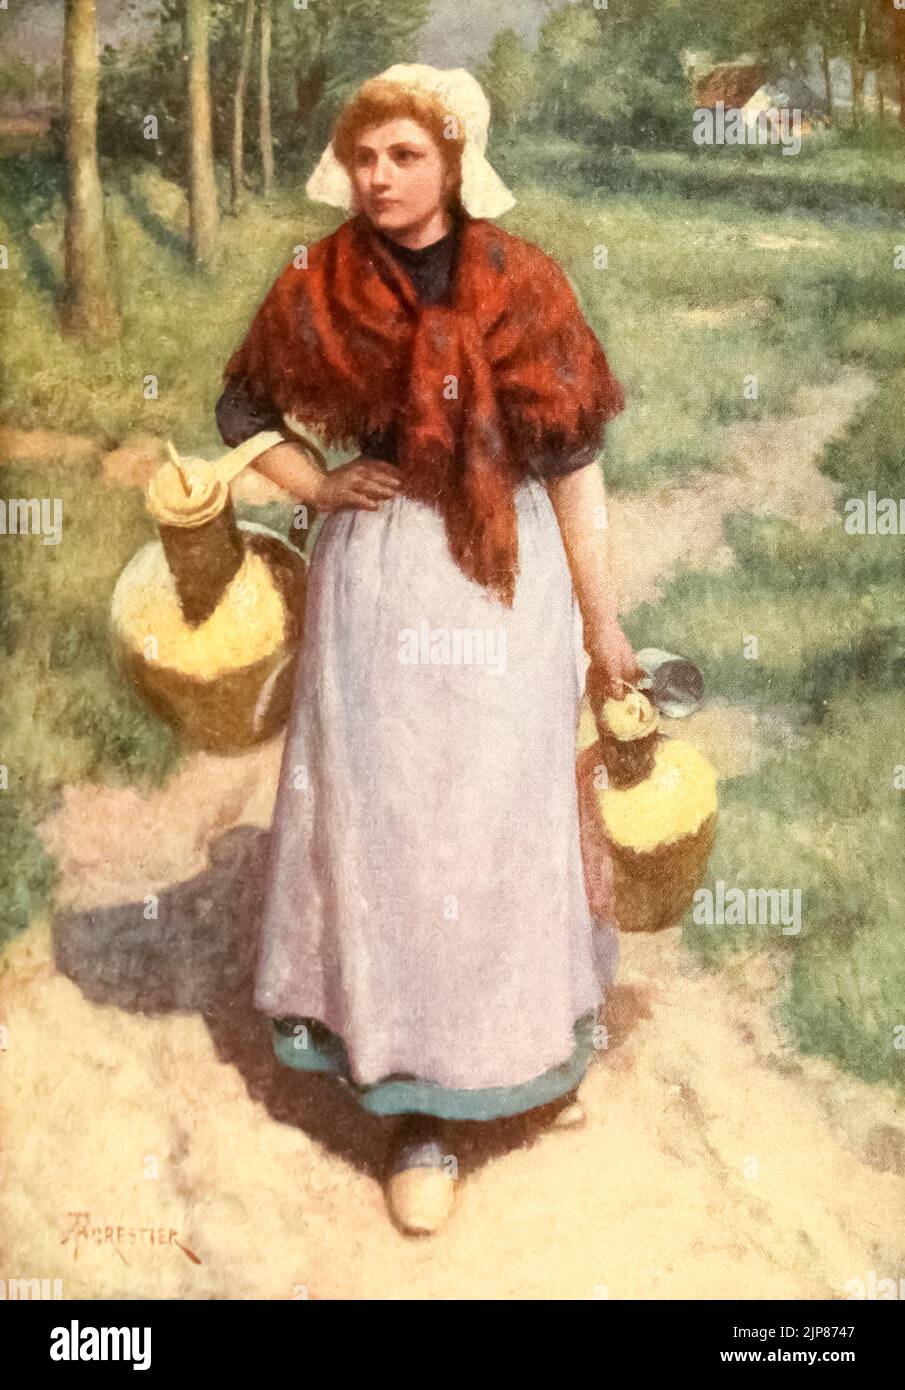 A Flemish Country Girl full body Frontispiece Painted by Amedee Forestier, from the book '  Bruges and West Flanders ' by George William Thomson Omond, Publication date 1906 Publisher London : A. & C. Black Sir Amédée Forestier (Paris 1854 – 18 November 1930 London) was an Anglo-French artist and illustrator who specialised in historical and prehistoric scenes, and landscapes. Stock Photo